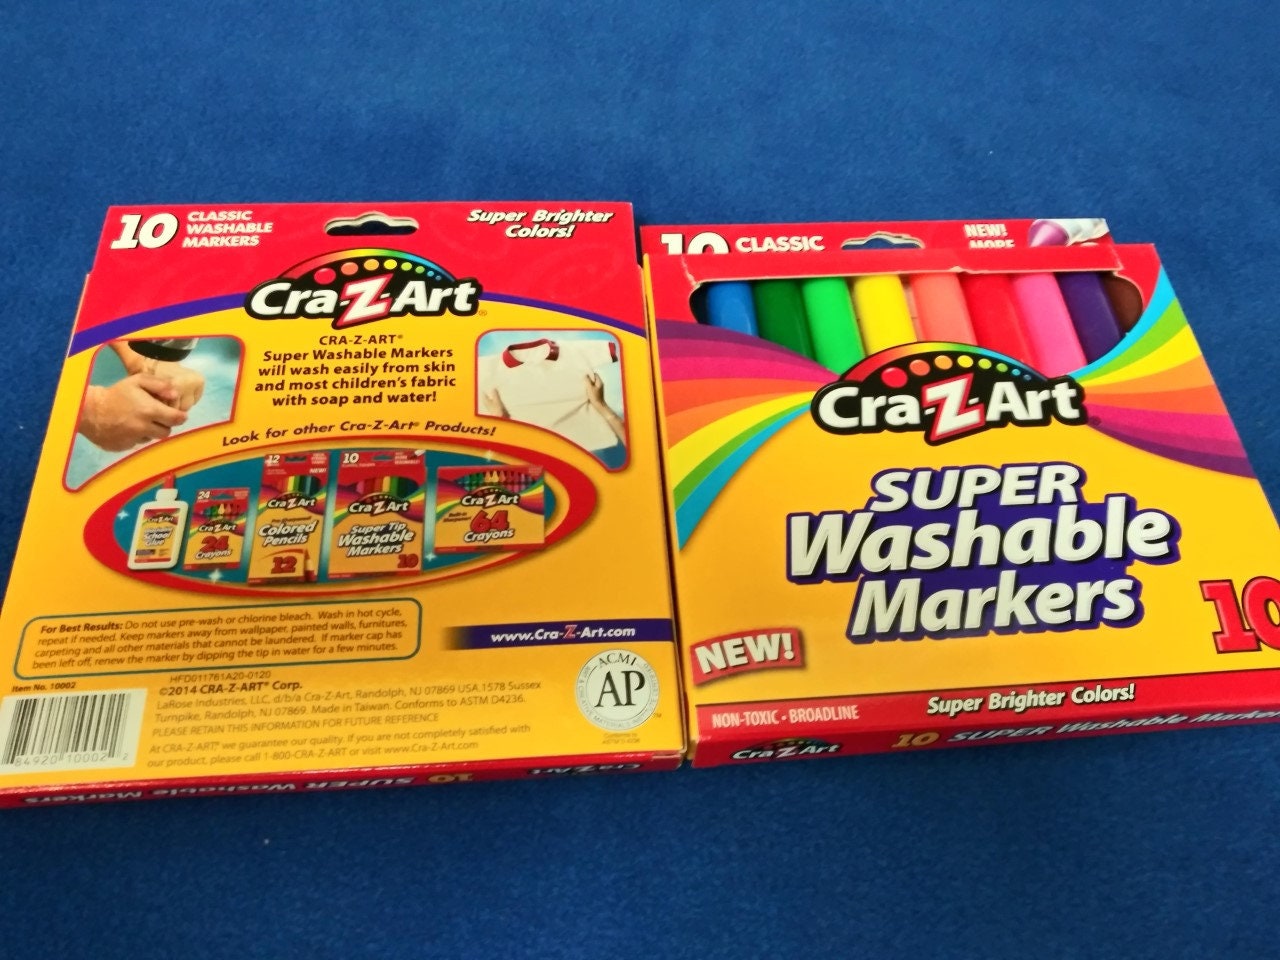 Cra-Z-Art Washable Markers